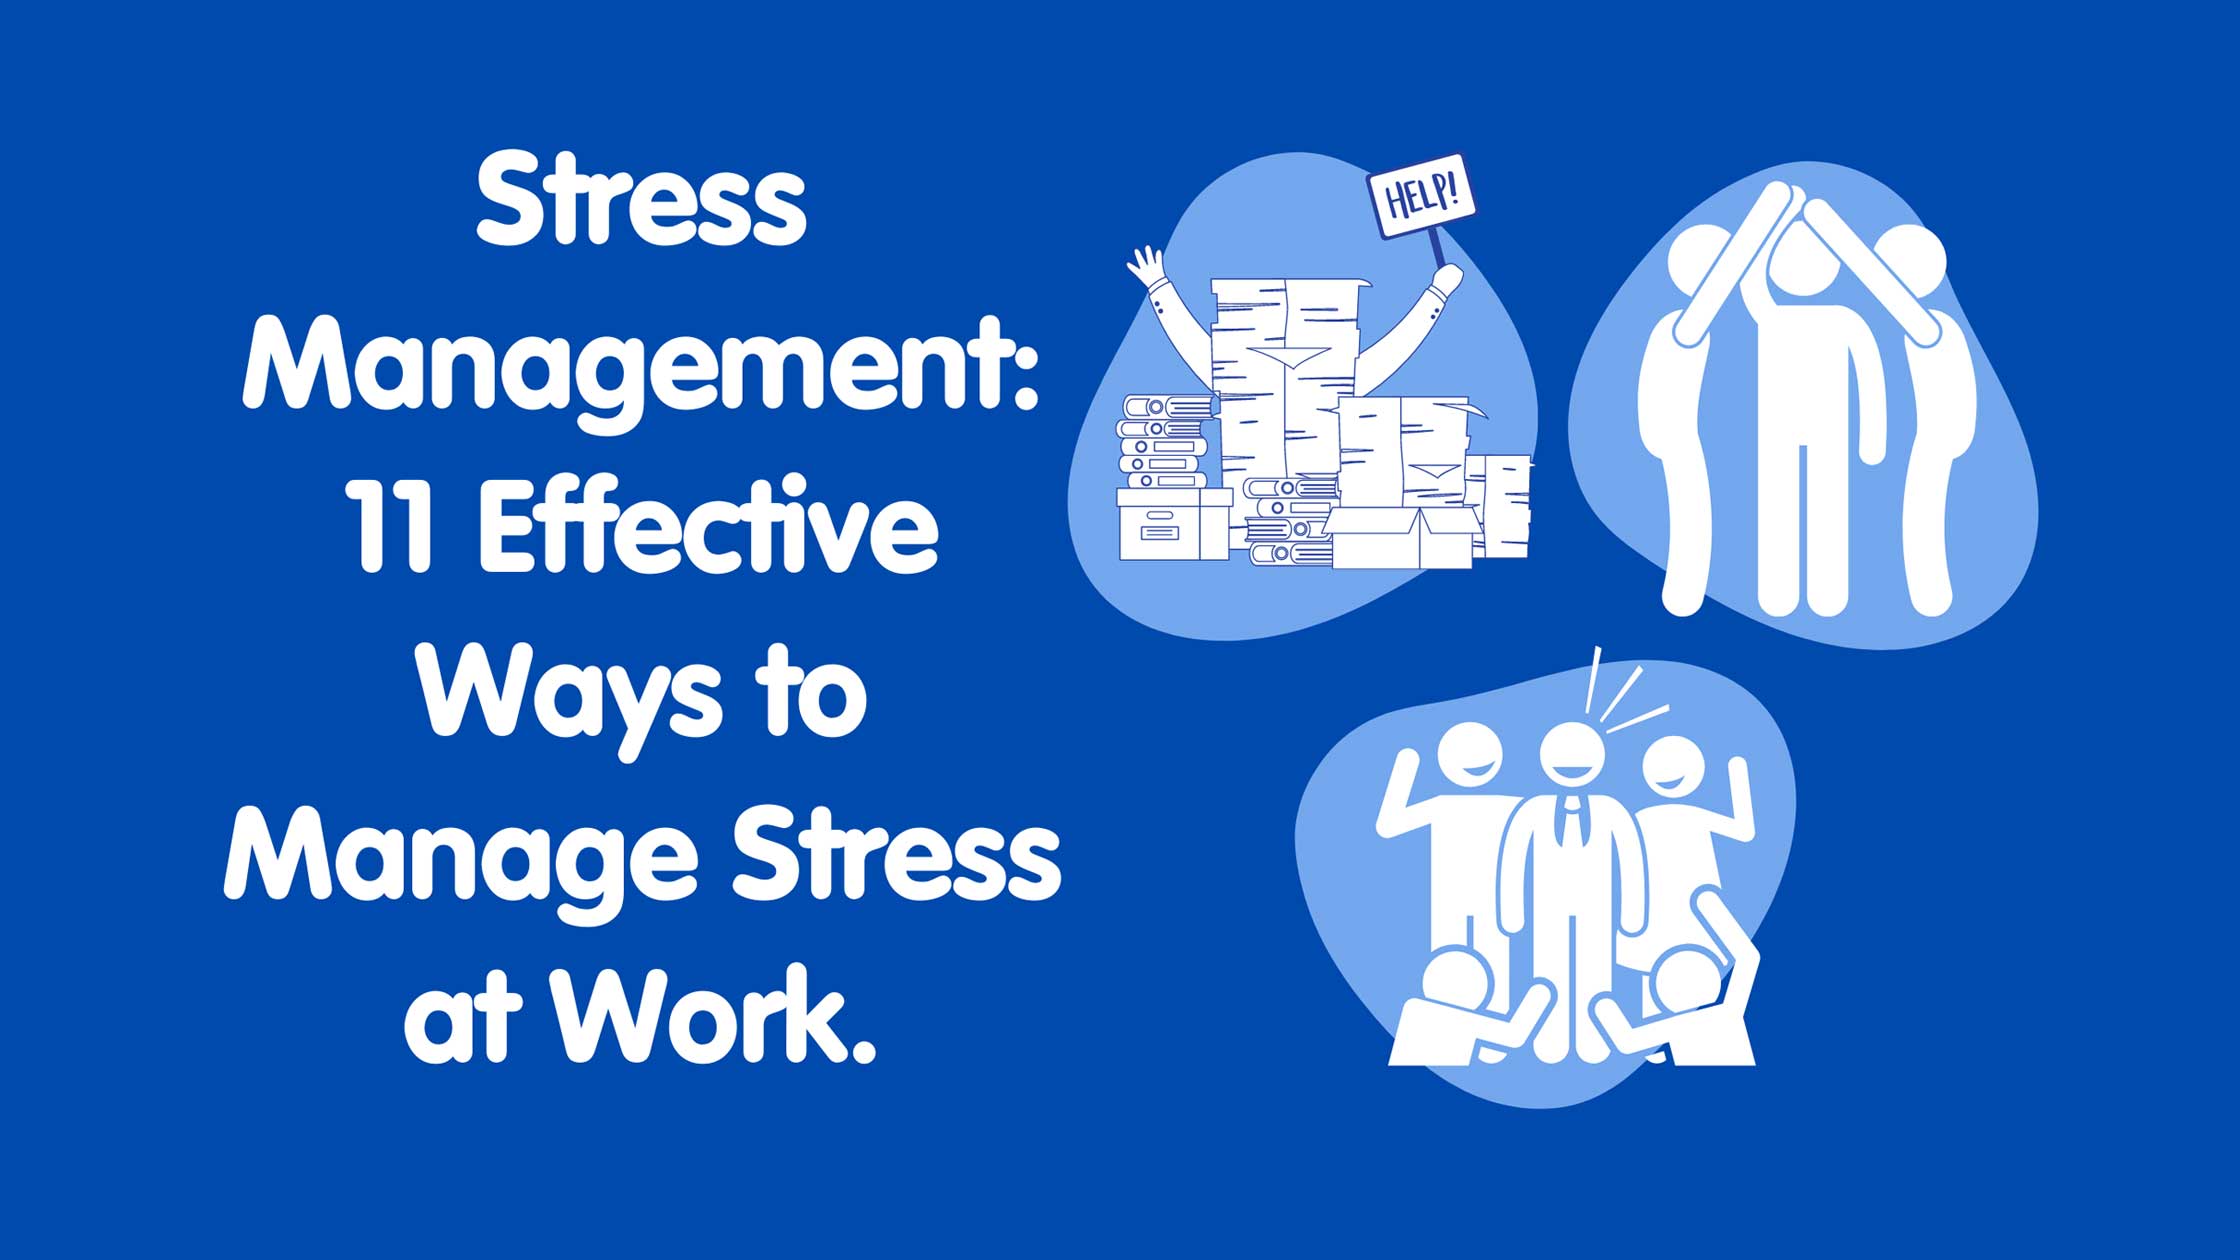 Stress Management: 11 Effective Ways to Manage Stress at Work